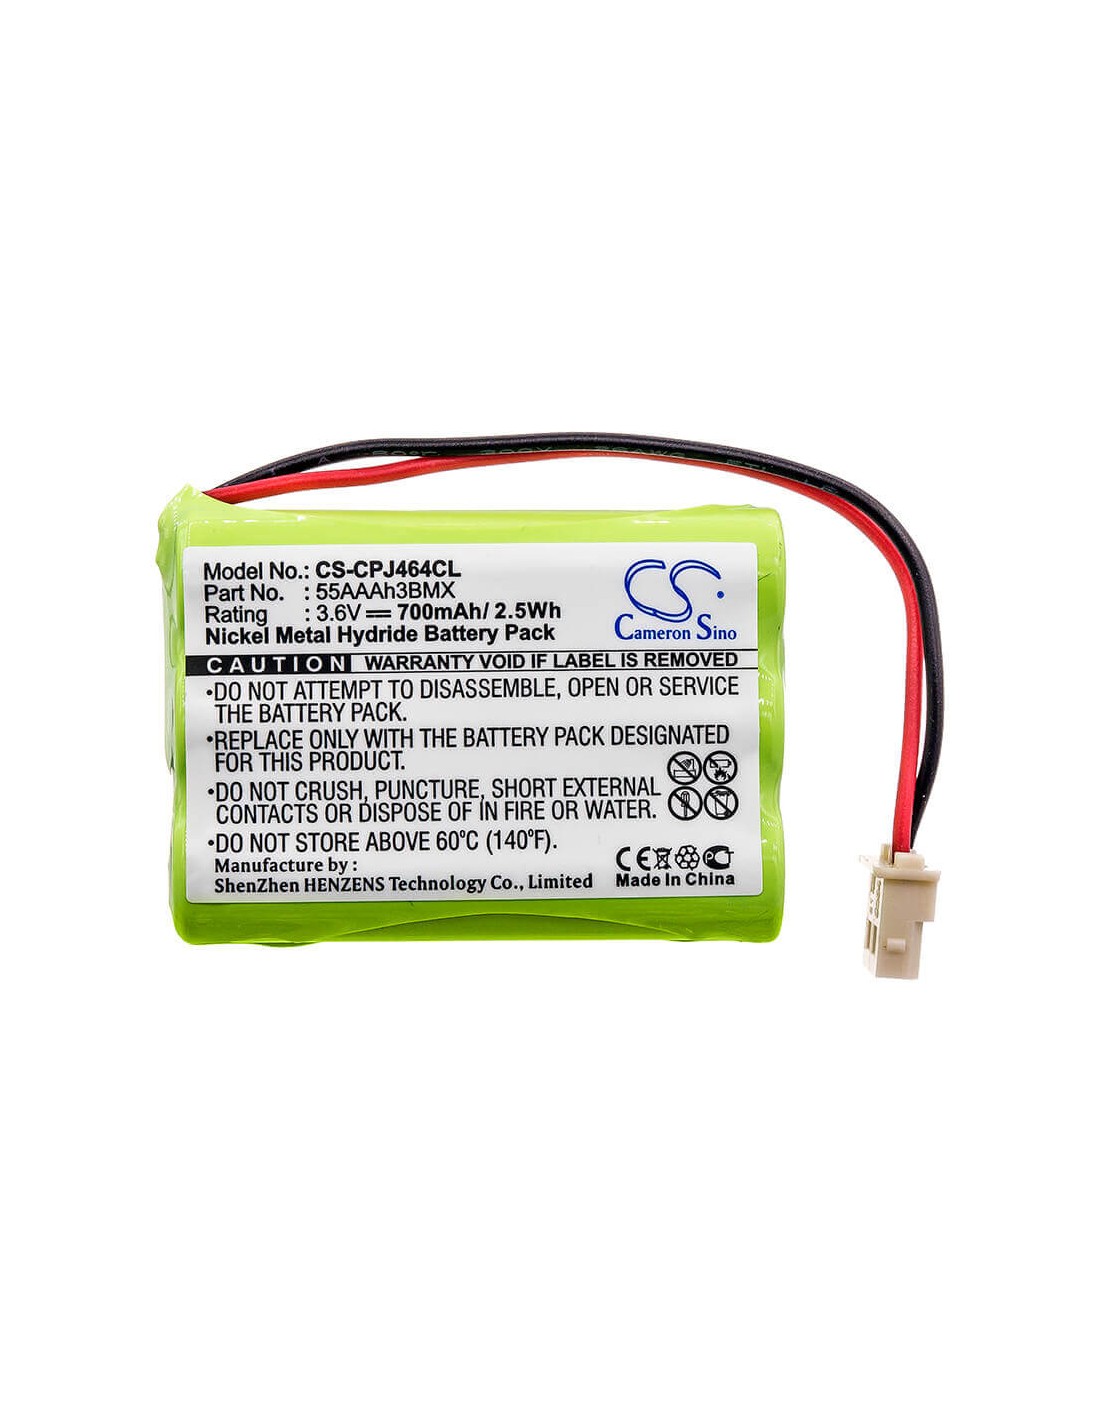 Battery for Coby, Ctp8200, Ctp8250, Ctp8800, Pm38bat 3.6V, 700mAh - 2.52Wh